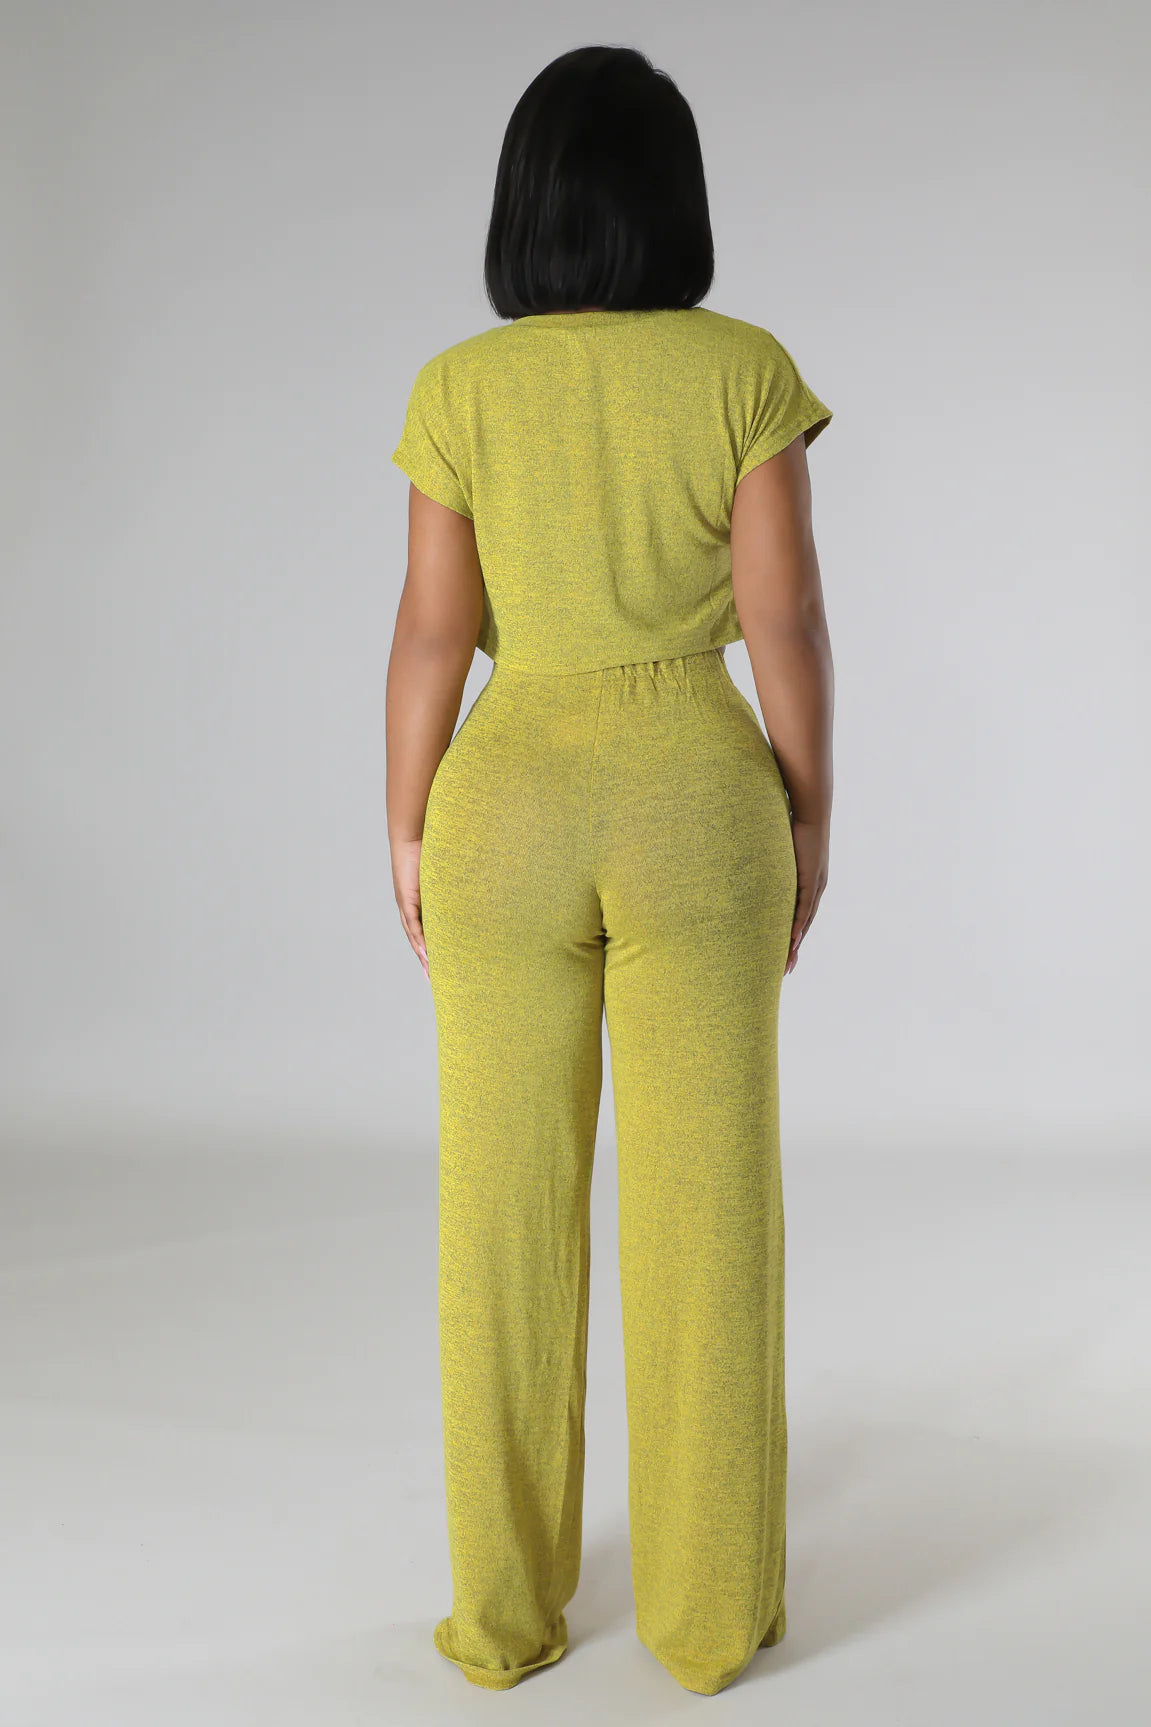 Southern Comfort Pant Set Yellow - Ali’s Couture 